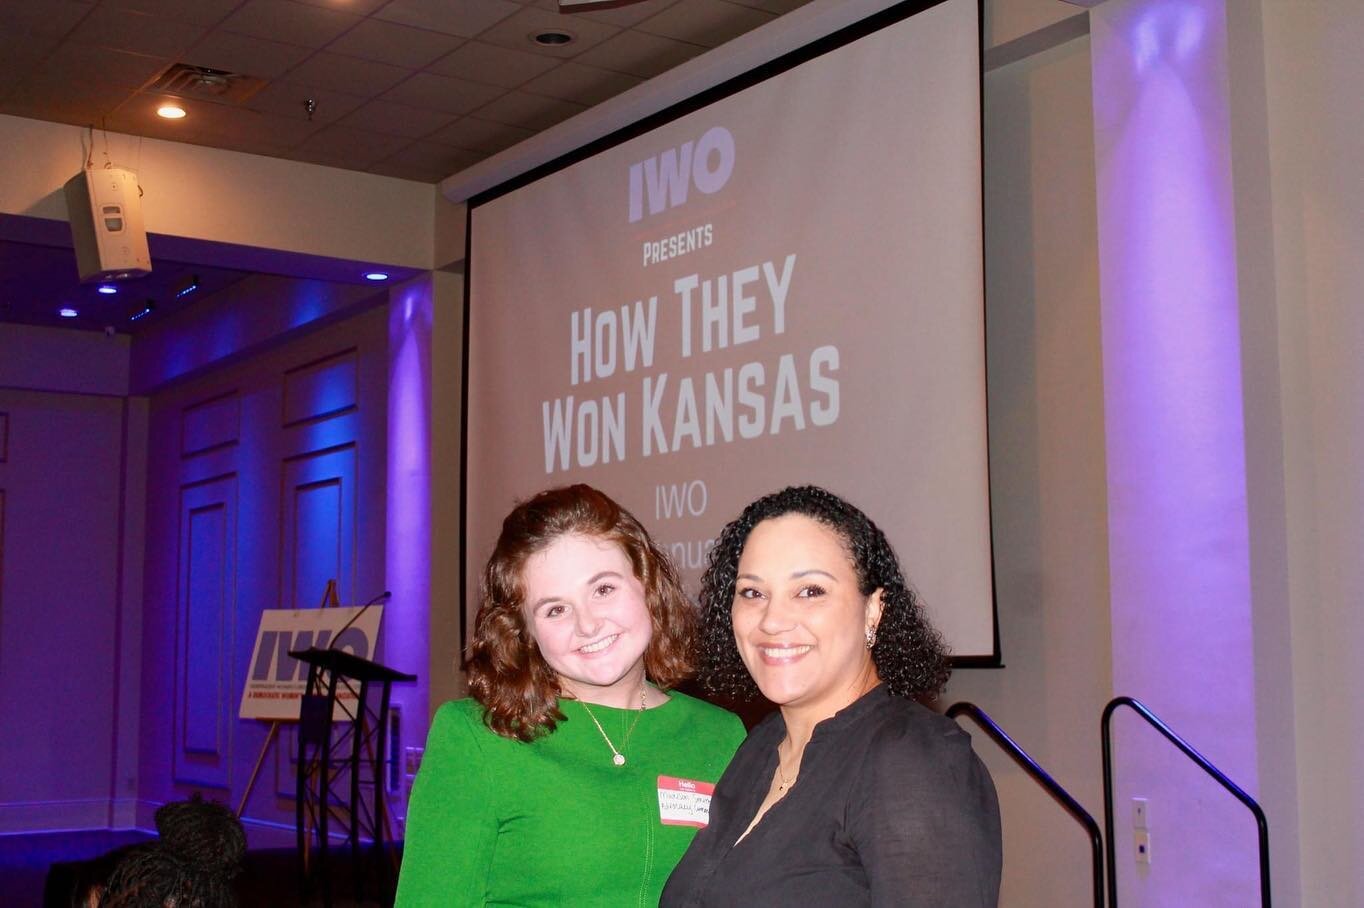 Today&rsquo;s IWO Annual Luncheon was an amazing experience. Shoutout to our IWO Program Committee Chair, Tiffaney Bradley, for all of her hard work. Also, special thanks to our keynote speaker Rebecca Tong who traveled all the way from Kansas to be 